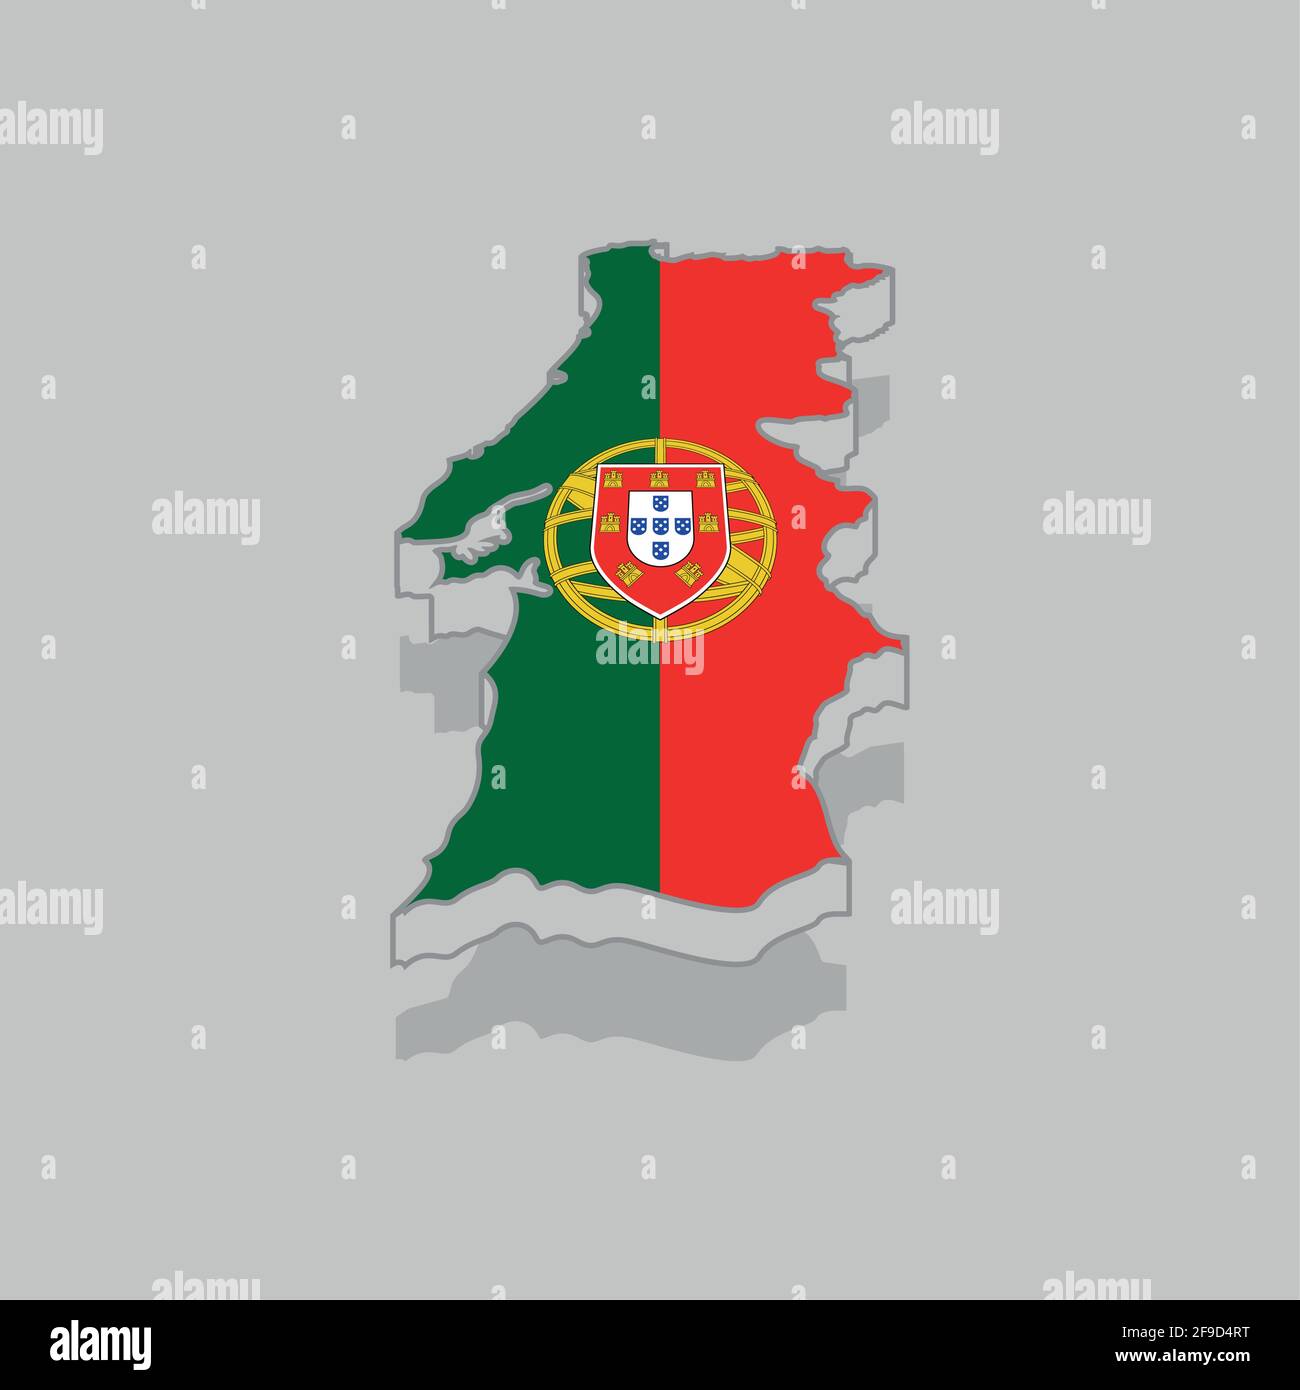 Portugal detailed map with Animated flag 3D Model $20 - .3ds .fbx - Free3D